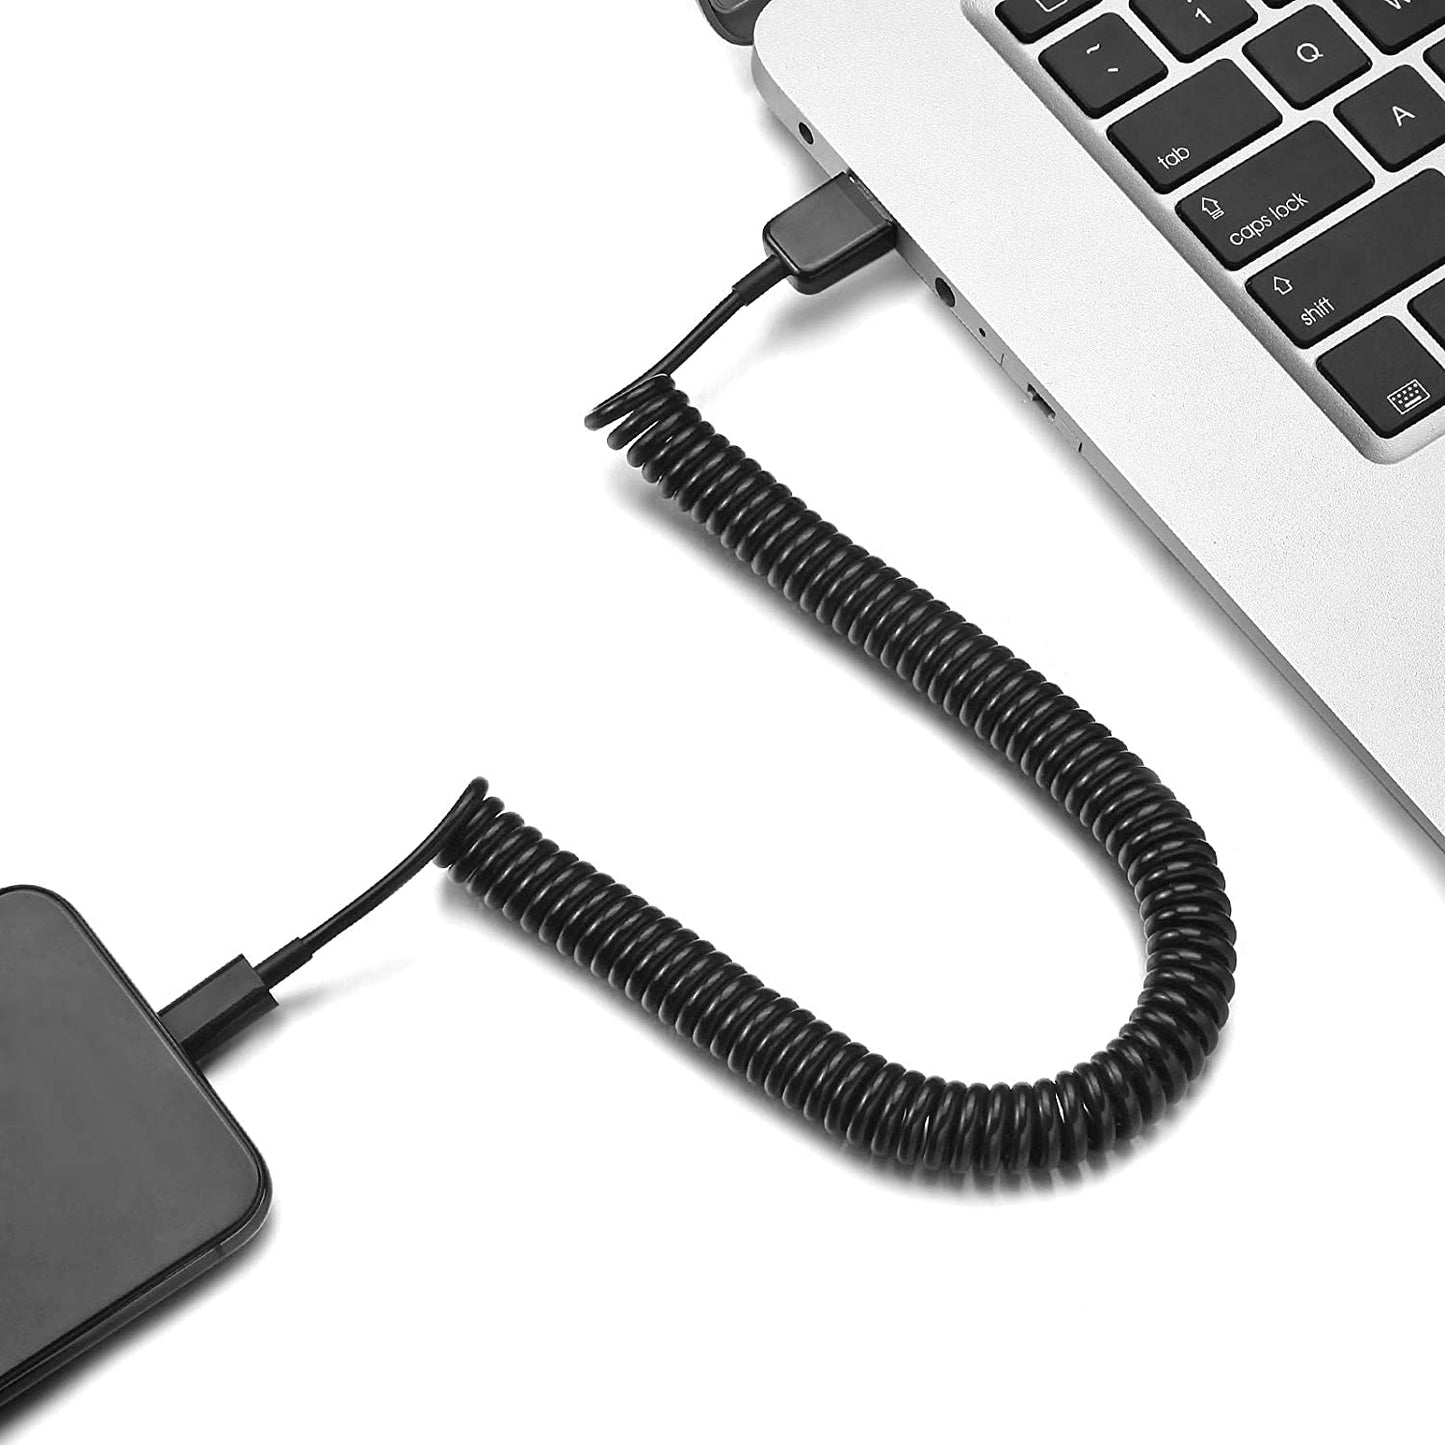 Coiled USB Cable, Black Sync Power Wire Micro-USB to USB-C Adapter Charger Cord - NWK81